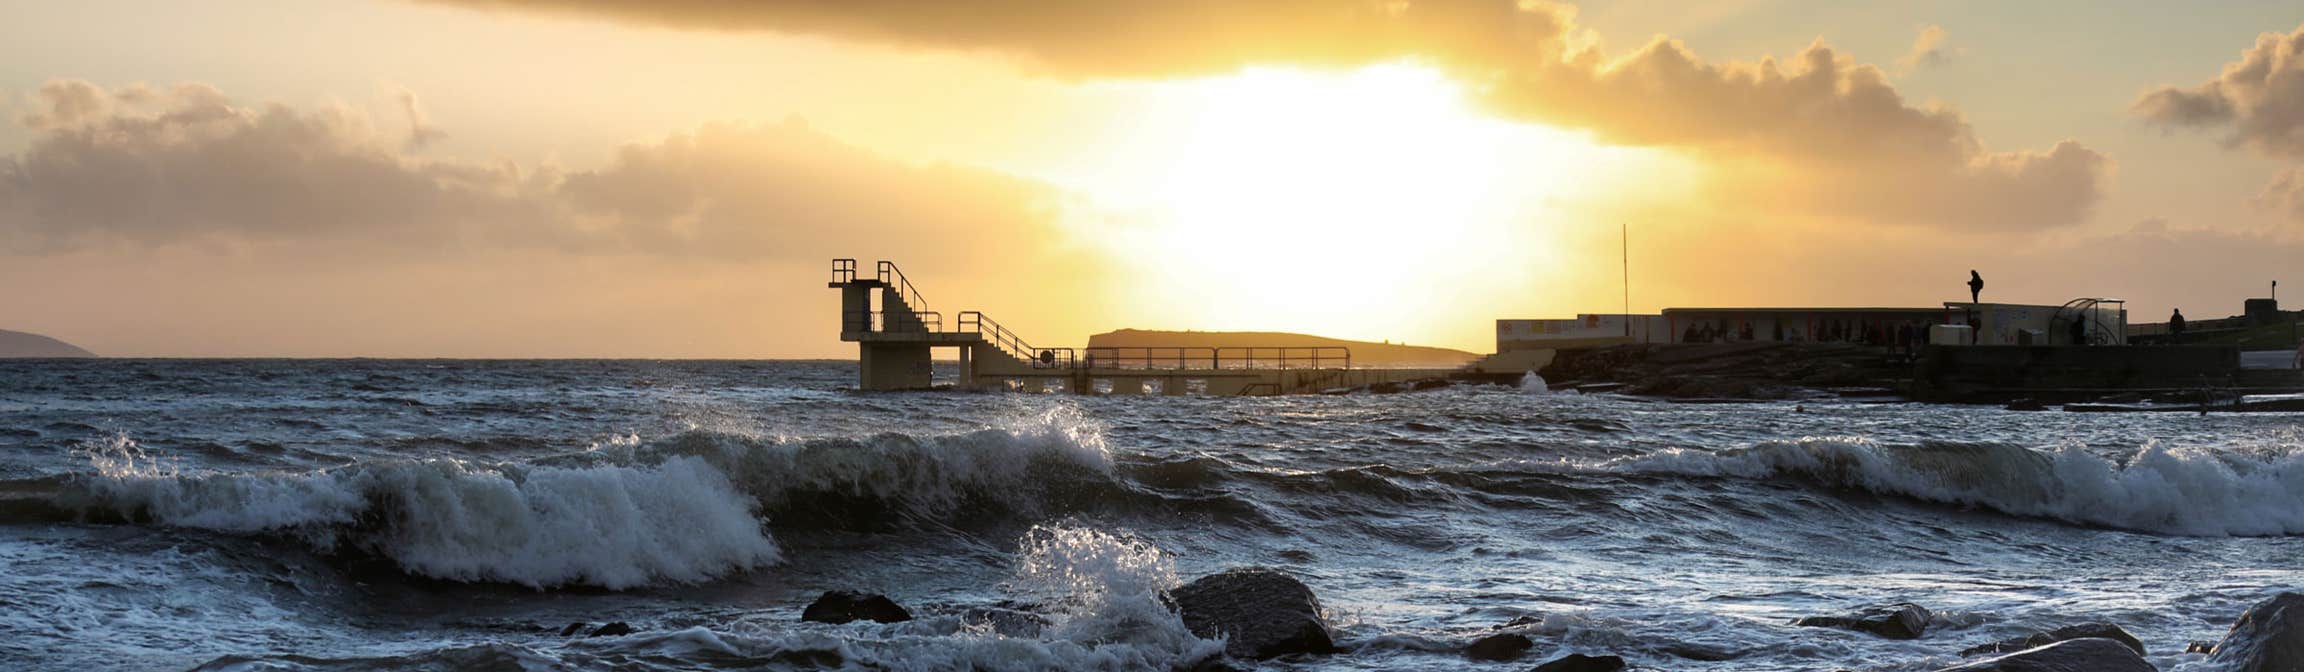 Image of Blackrock diving tower at sunset, Salthill, County Galway